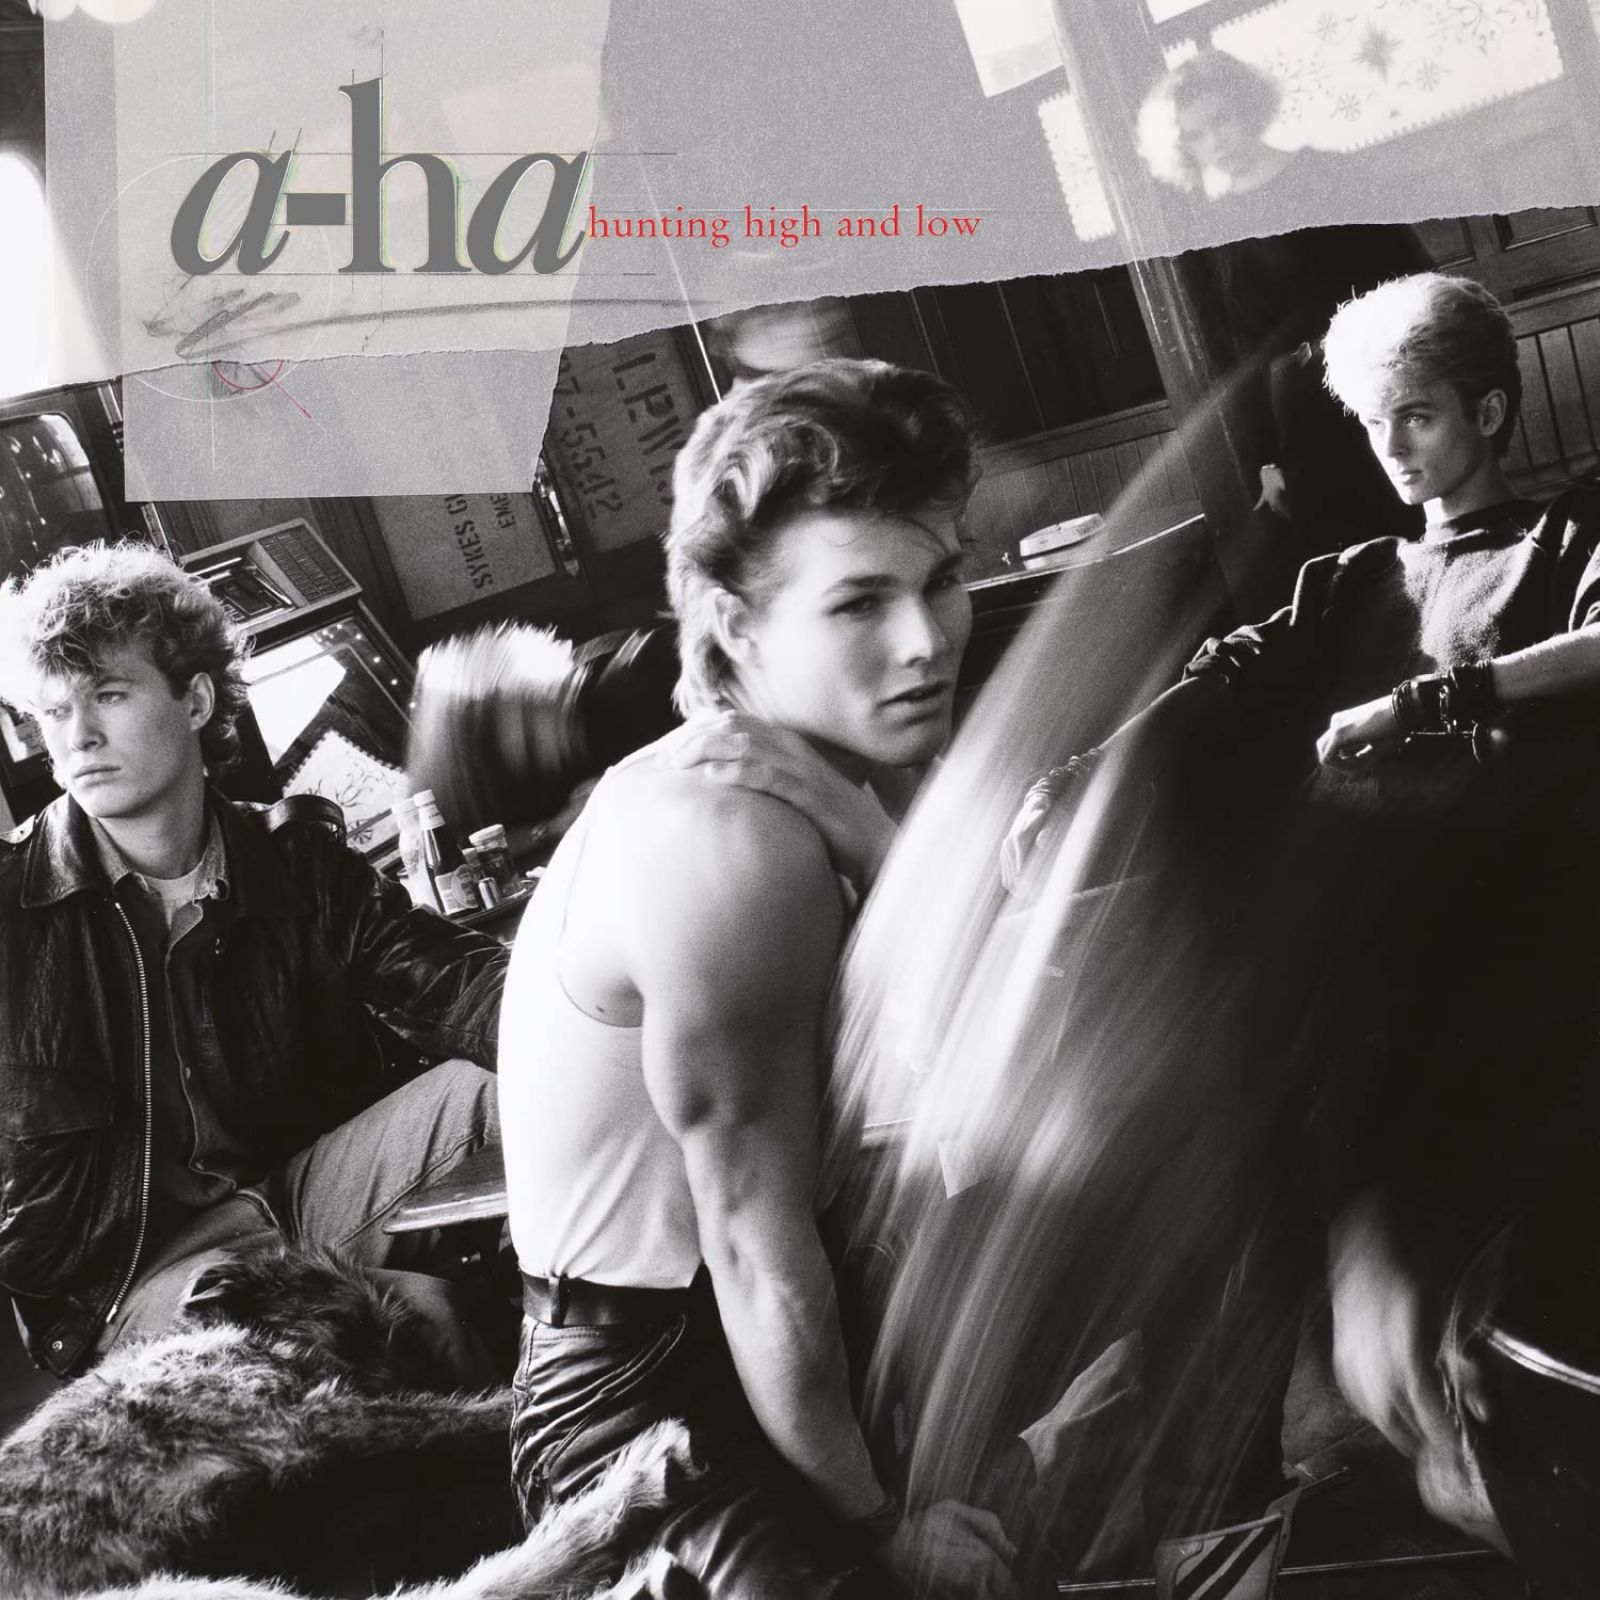 a-ha - Hunting High And Low [6 LP Super Deluxe BoxSet] (4050538791396)